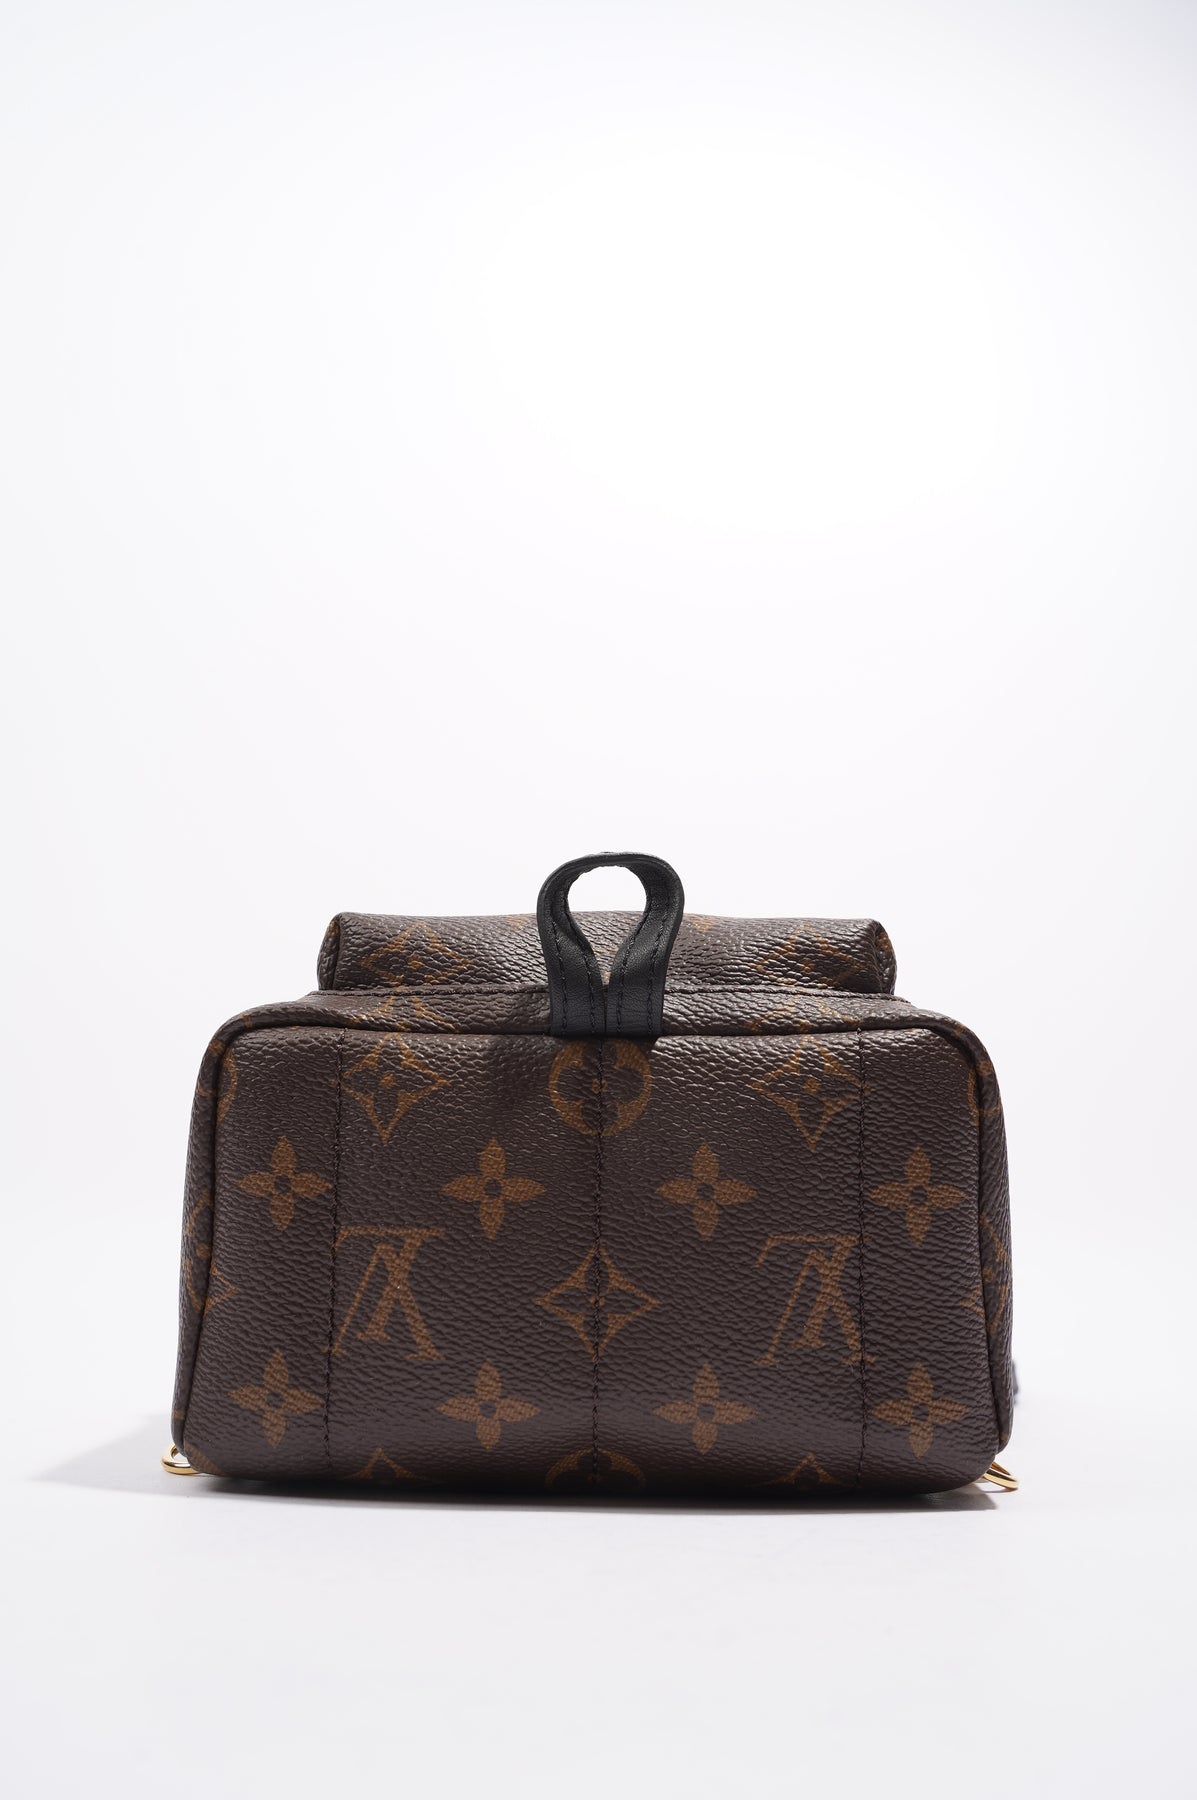 Louis Vuitton Backpack Mini - 35 For Sale on 1stDibs